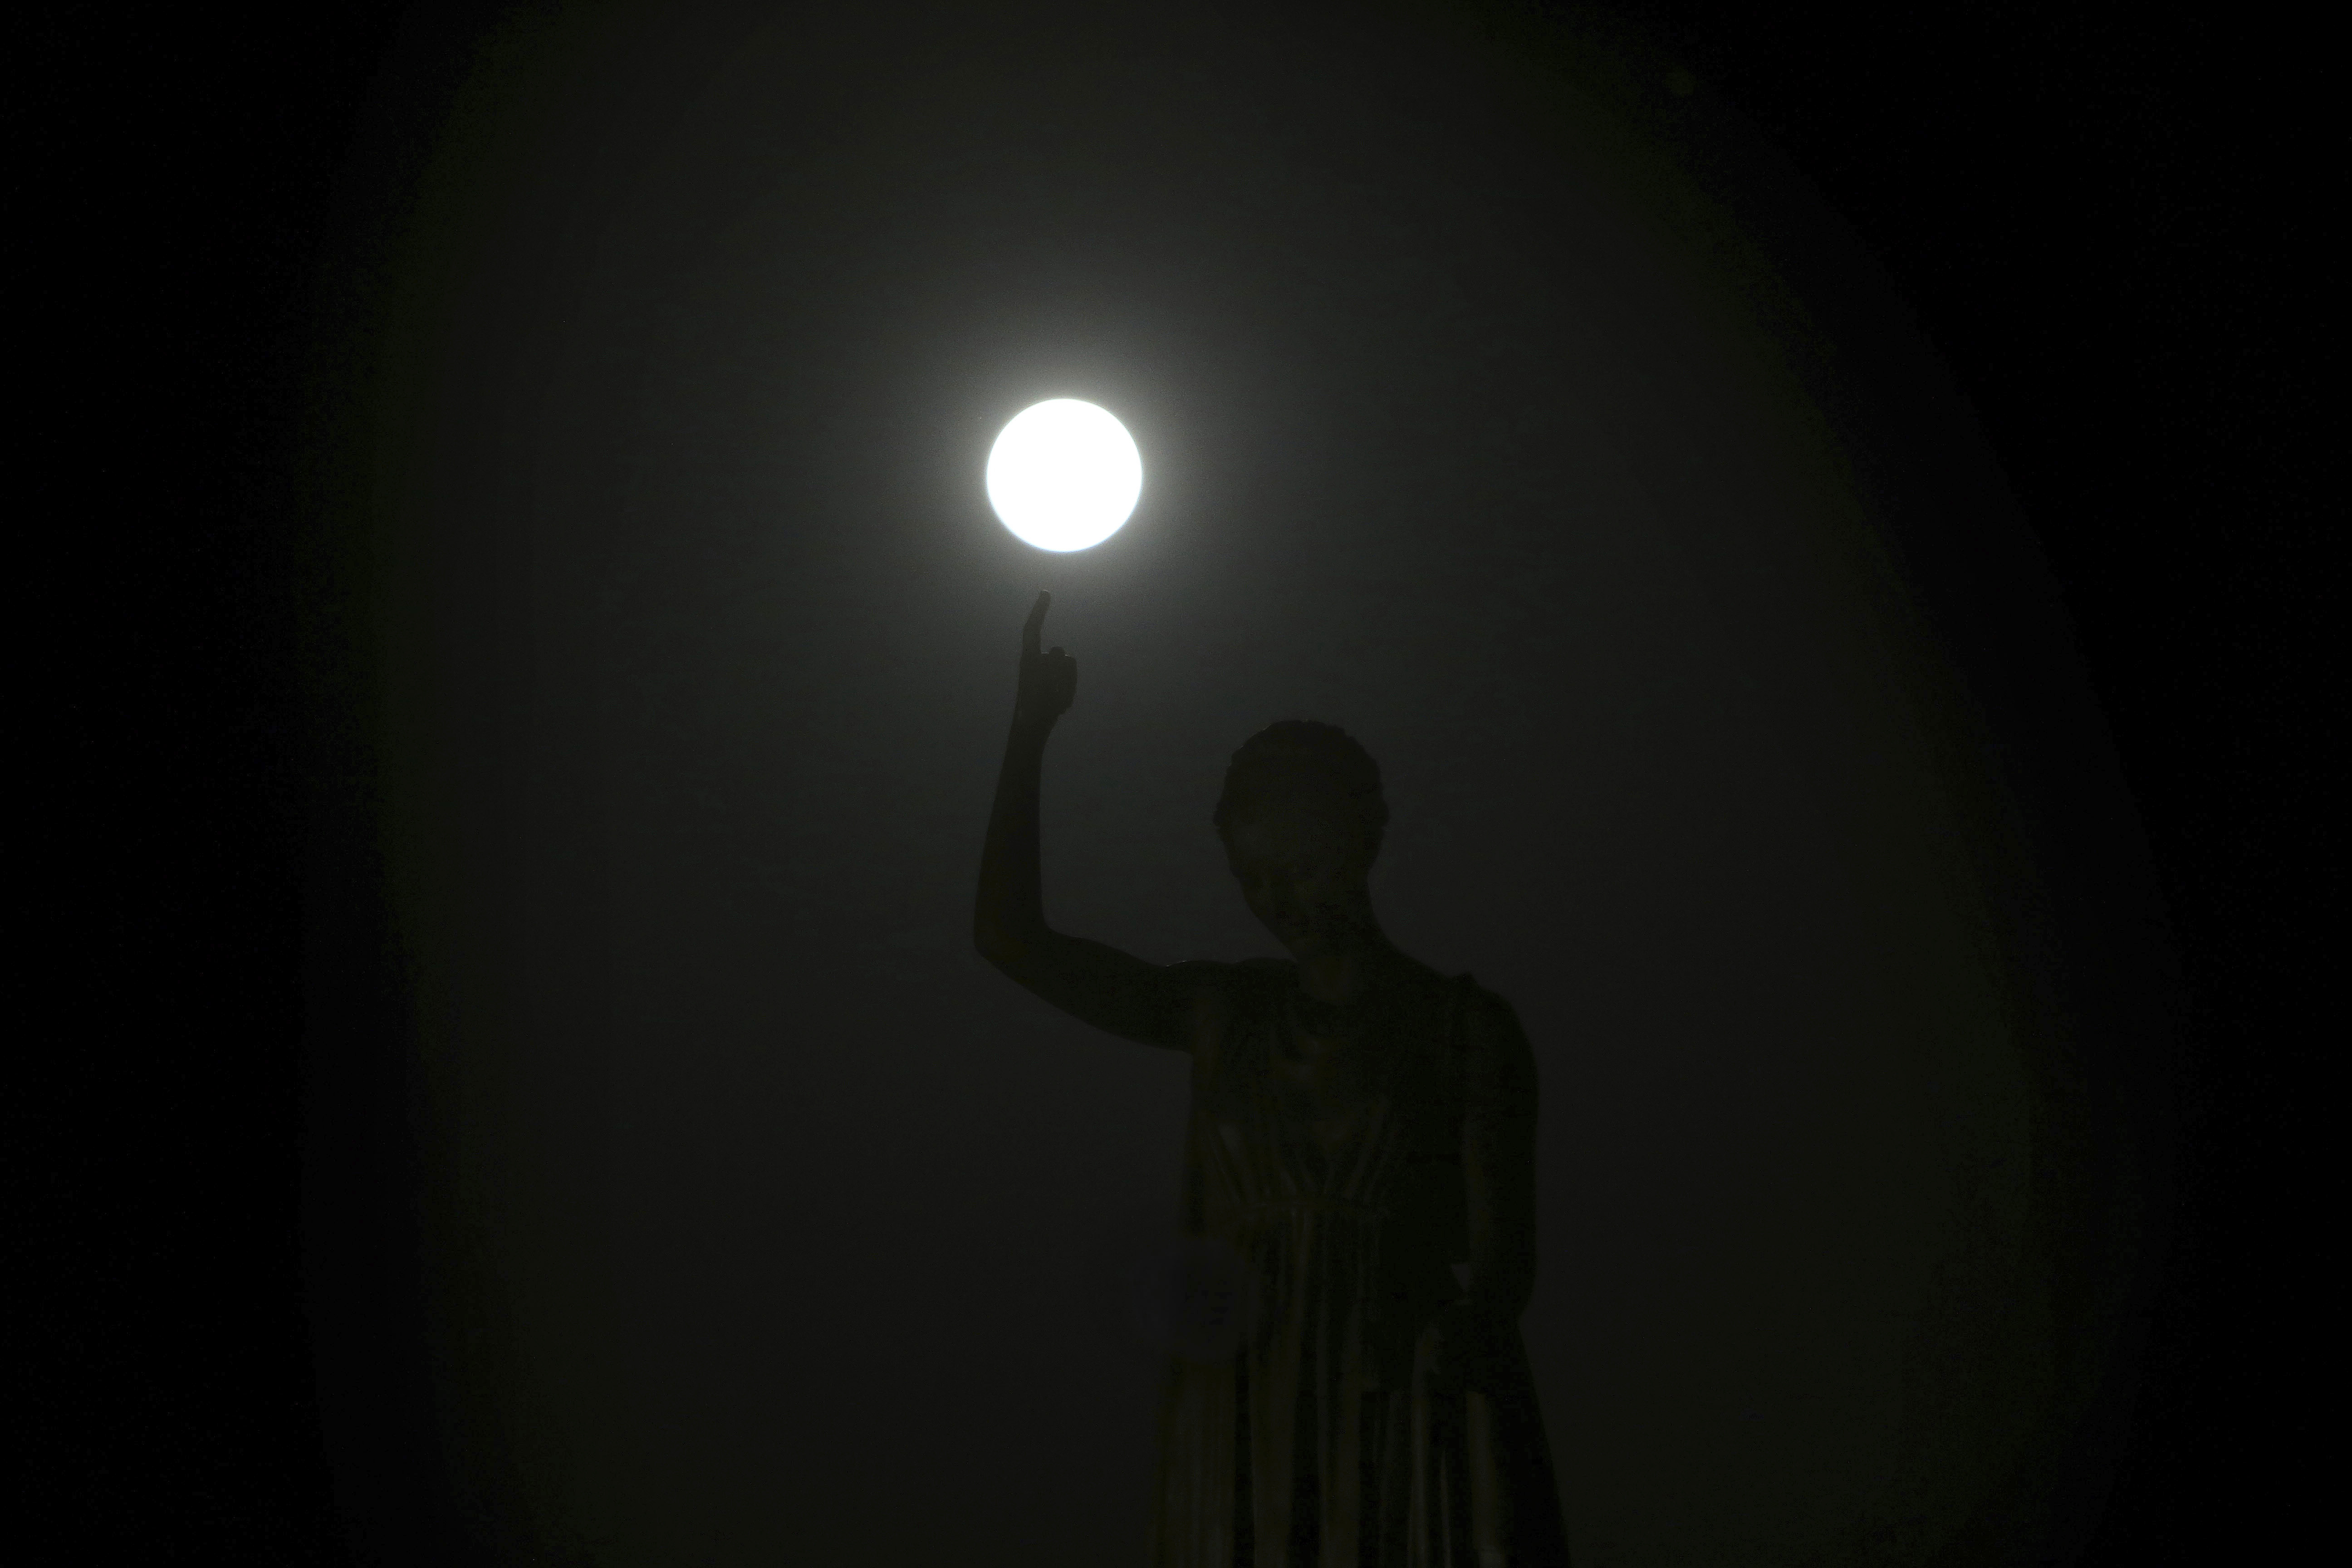 The supermoon rises over the Liberty Monument in Nicosia, Cyprus